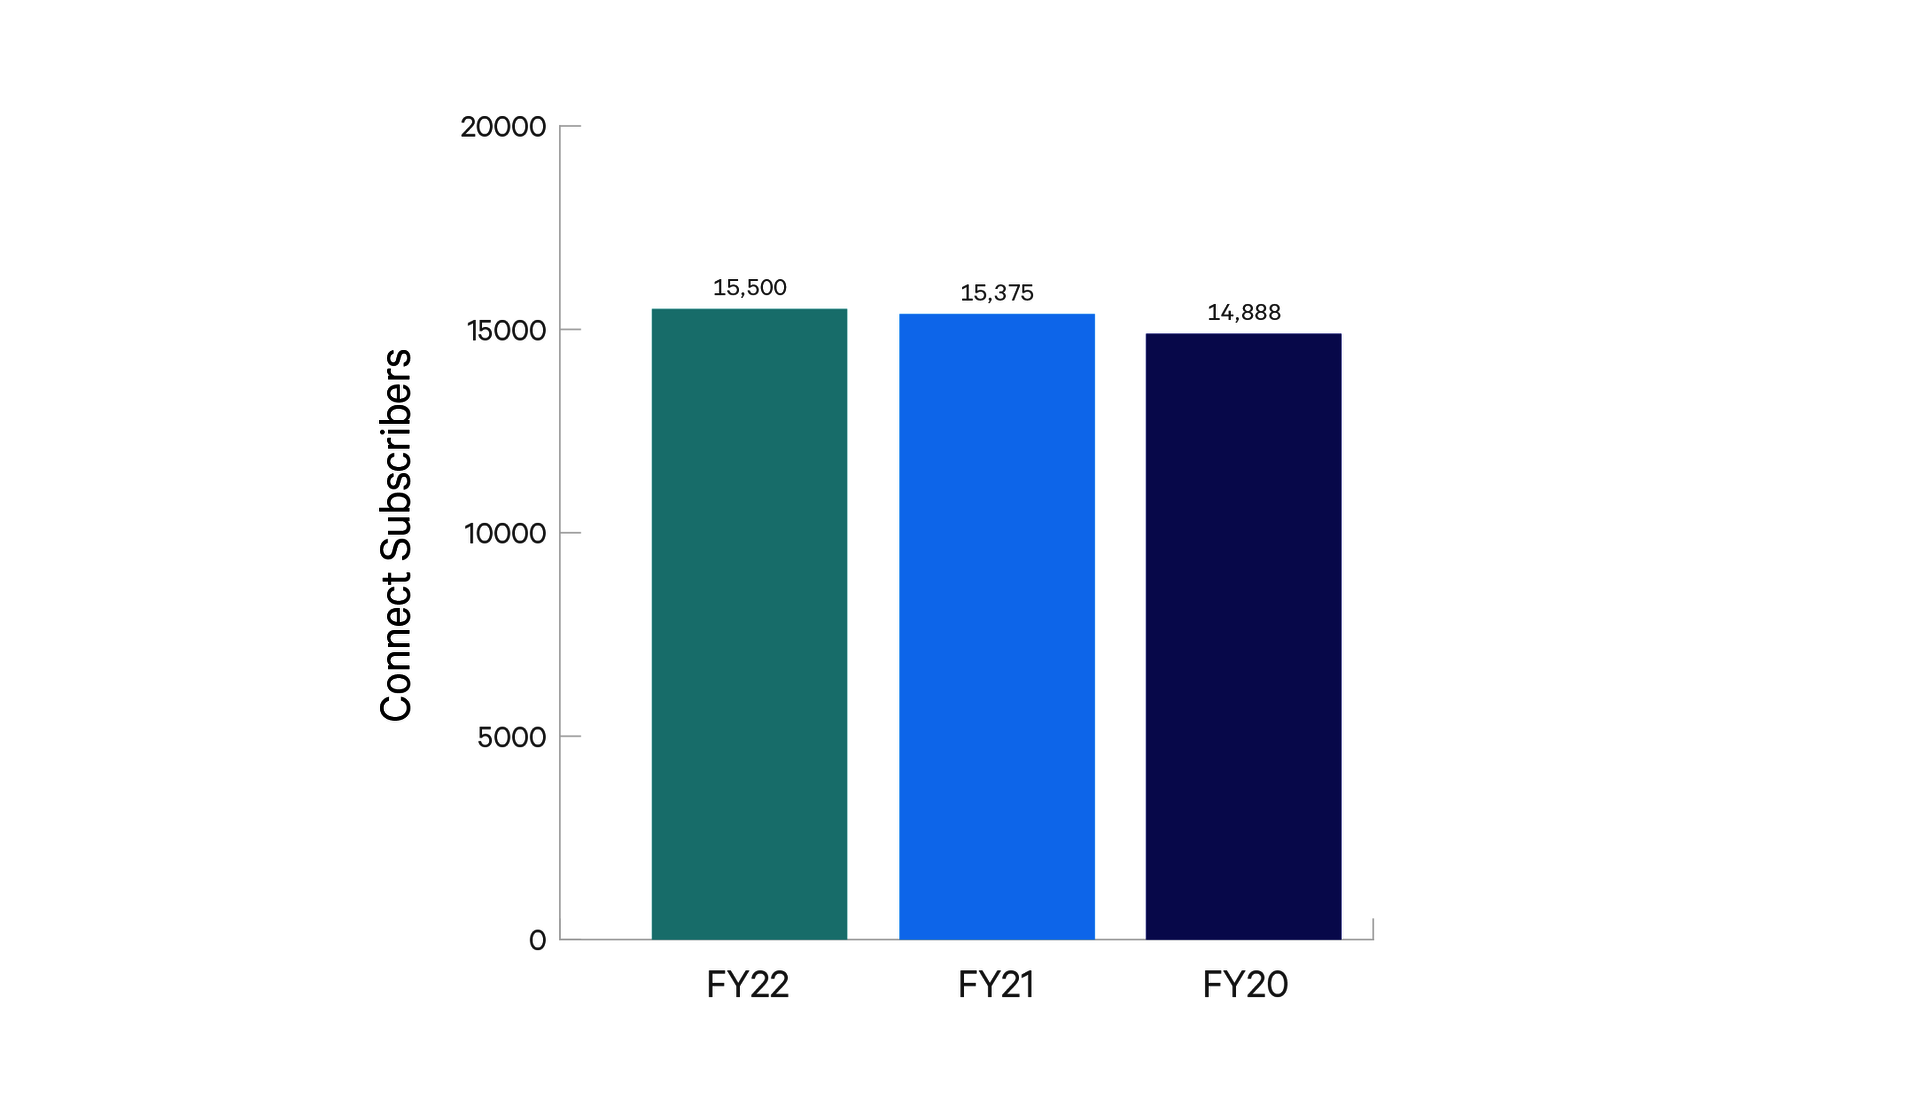 Bar graph with the Y-axis labeled “Connect Subscribers” and the X-axis labeled “FY22, FY21, and FY20”, showing that FY22 has 15500 subscribers, FY21 has 15375 subscribers, and FY20 has 14888 subscribers”.